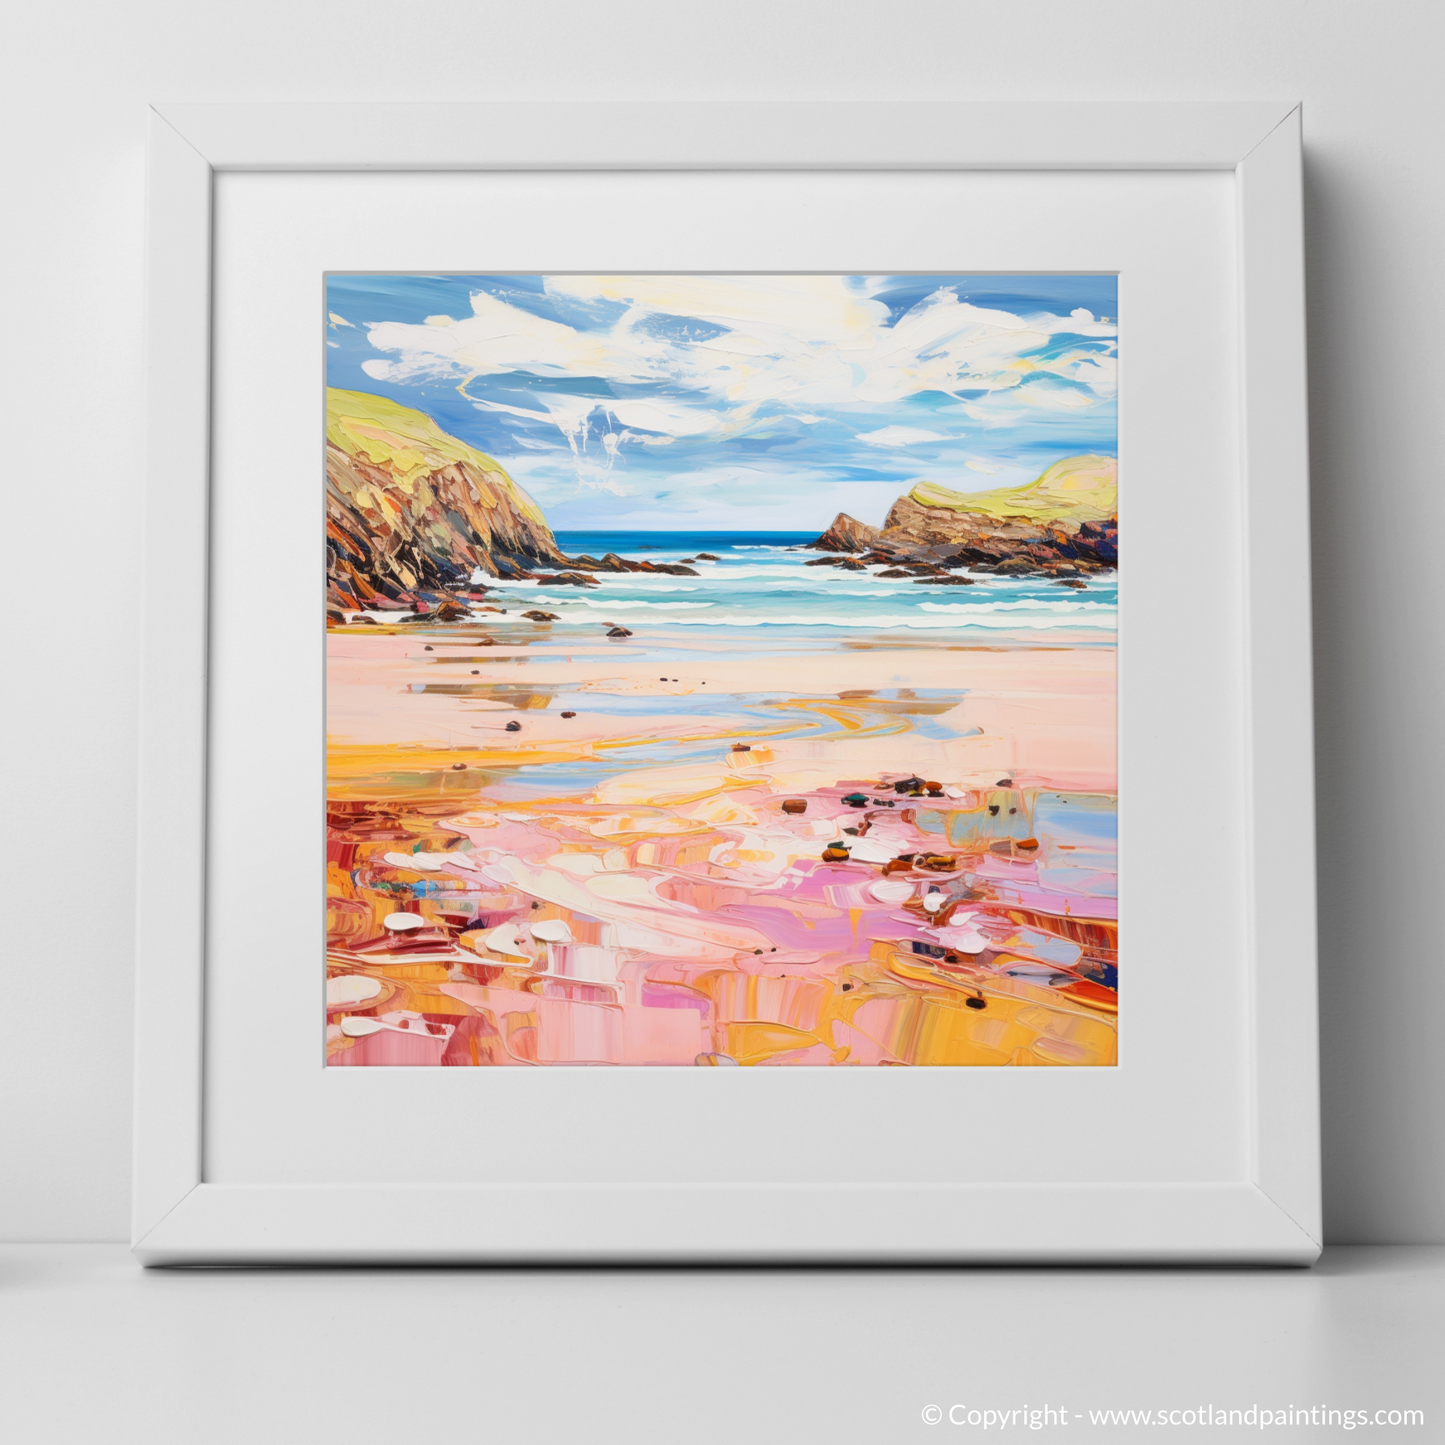 Art Print of Durness Beach, Sutherland in summer with a white frame